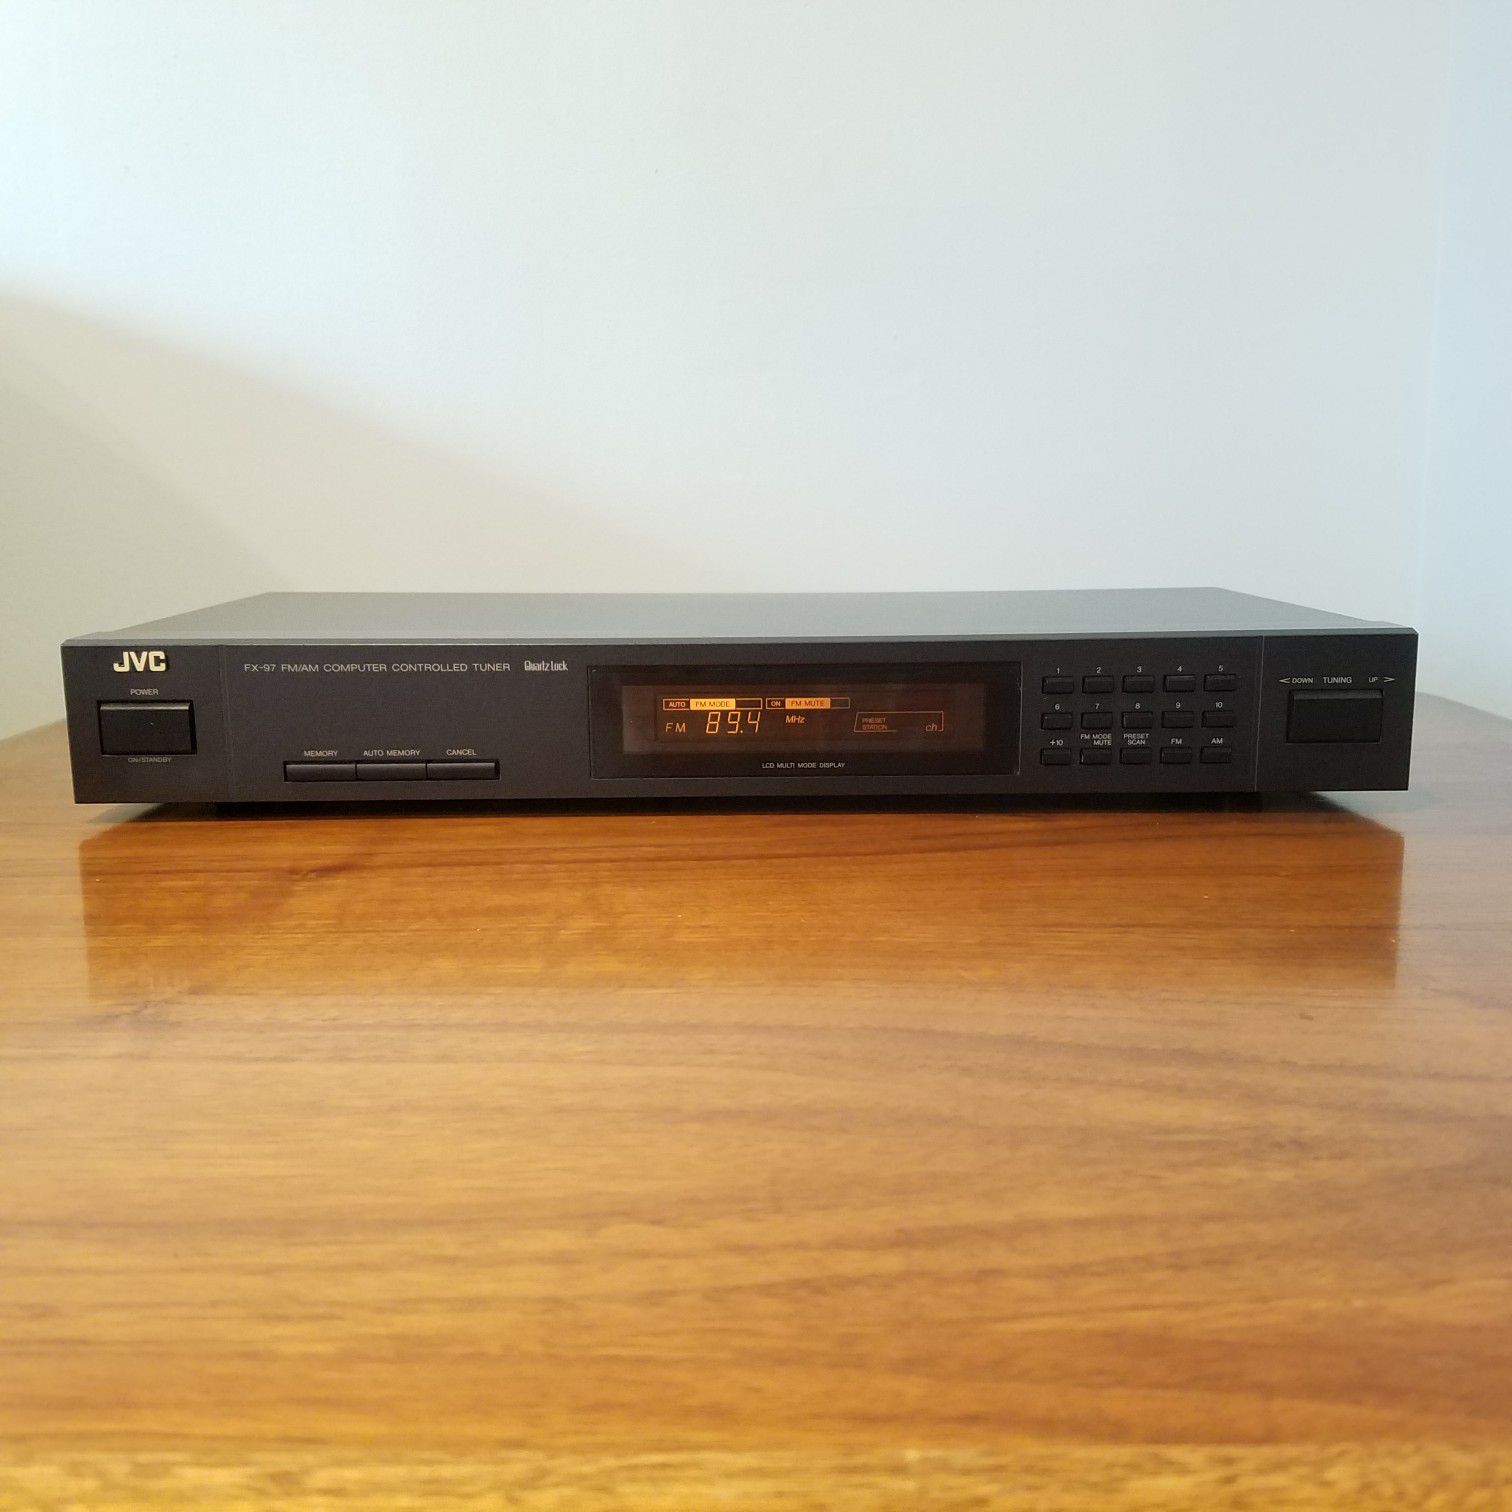 JVC FX-97 Black Stereo Tuner Computer Controller Tuner FM/AM Victor Company